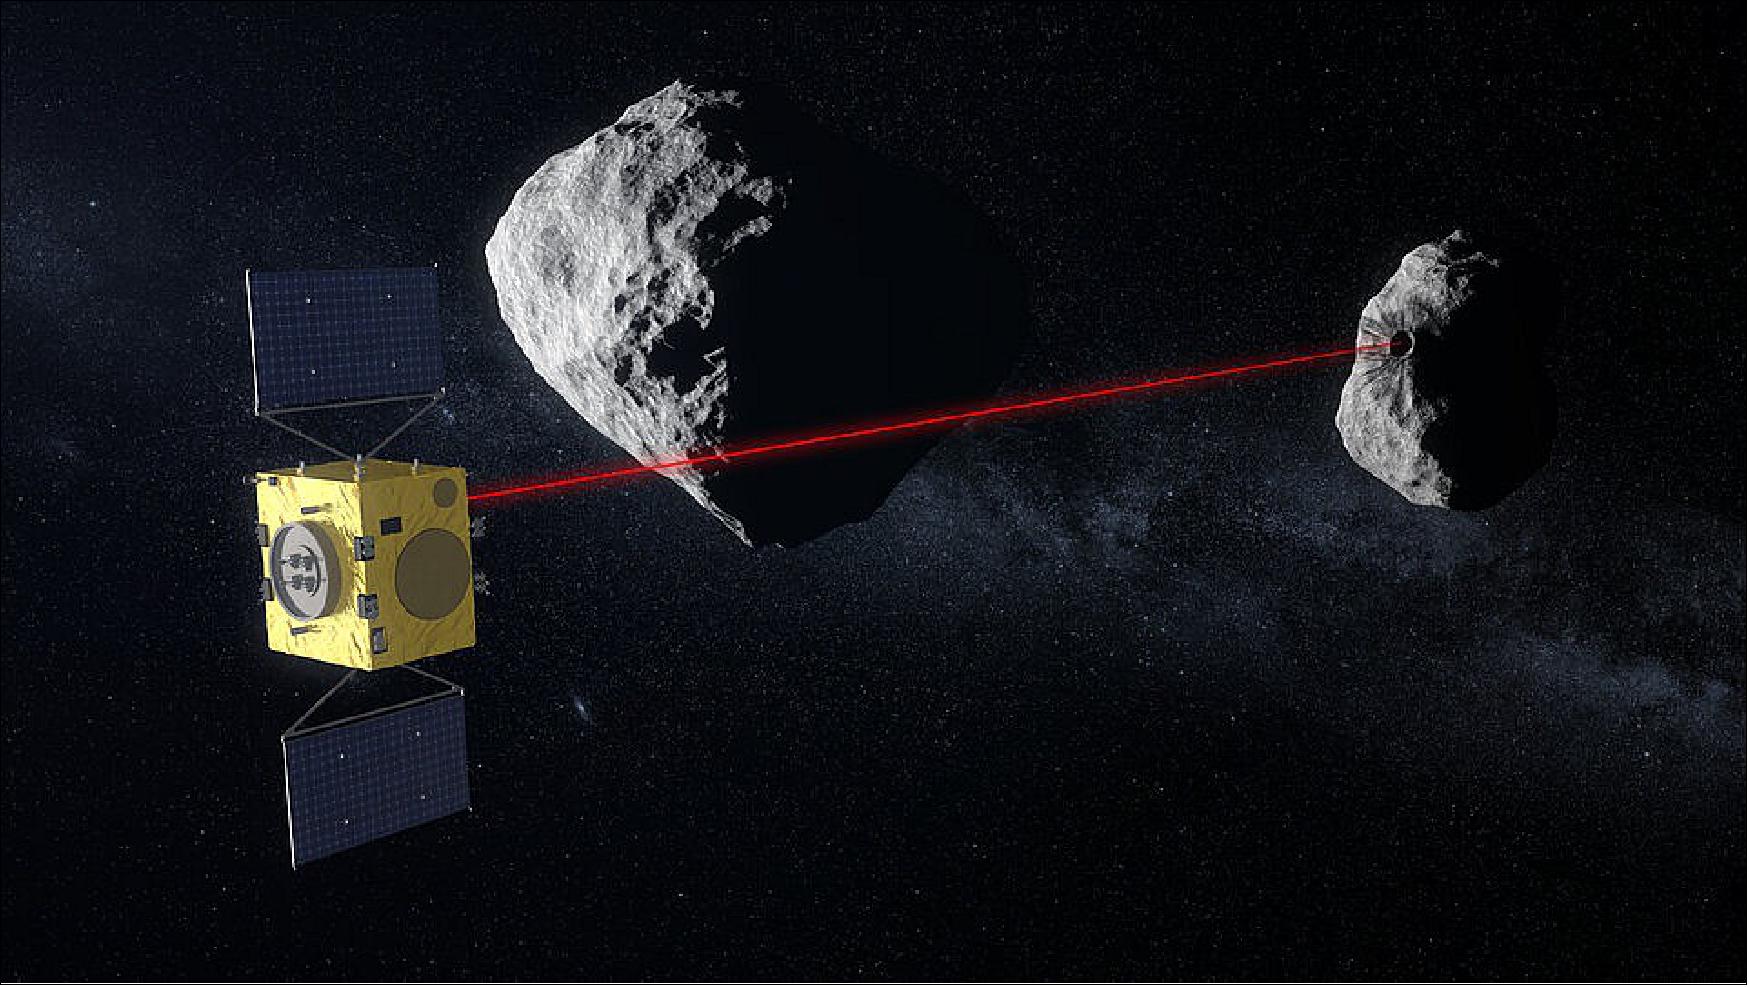 Figure 12: Hera scans Didymoon. Using its laser altimeter Hera scans Didymoon's surface. ESA’s Hera mission concept, currently under study, would be humanity’s first mission to a binary asteroid: the 780 m-diameter Didymos is accompanied by a 160 m-diameter secondary body (image credit: ESA - ScienceOffice.org)